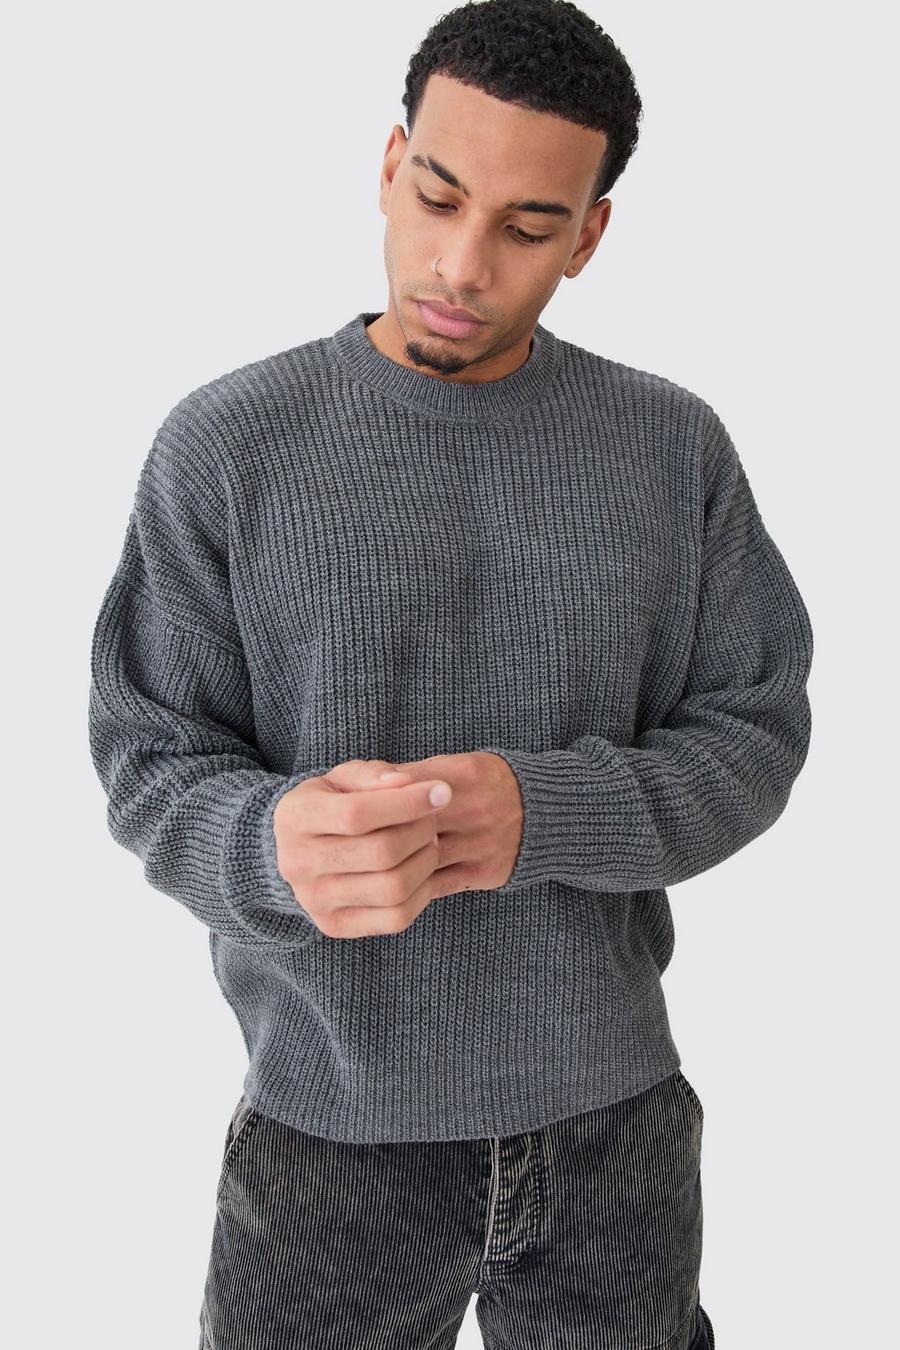 Men's Boxy Crew Neck Ribbed Knitted Jumper | Boohoo UK